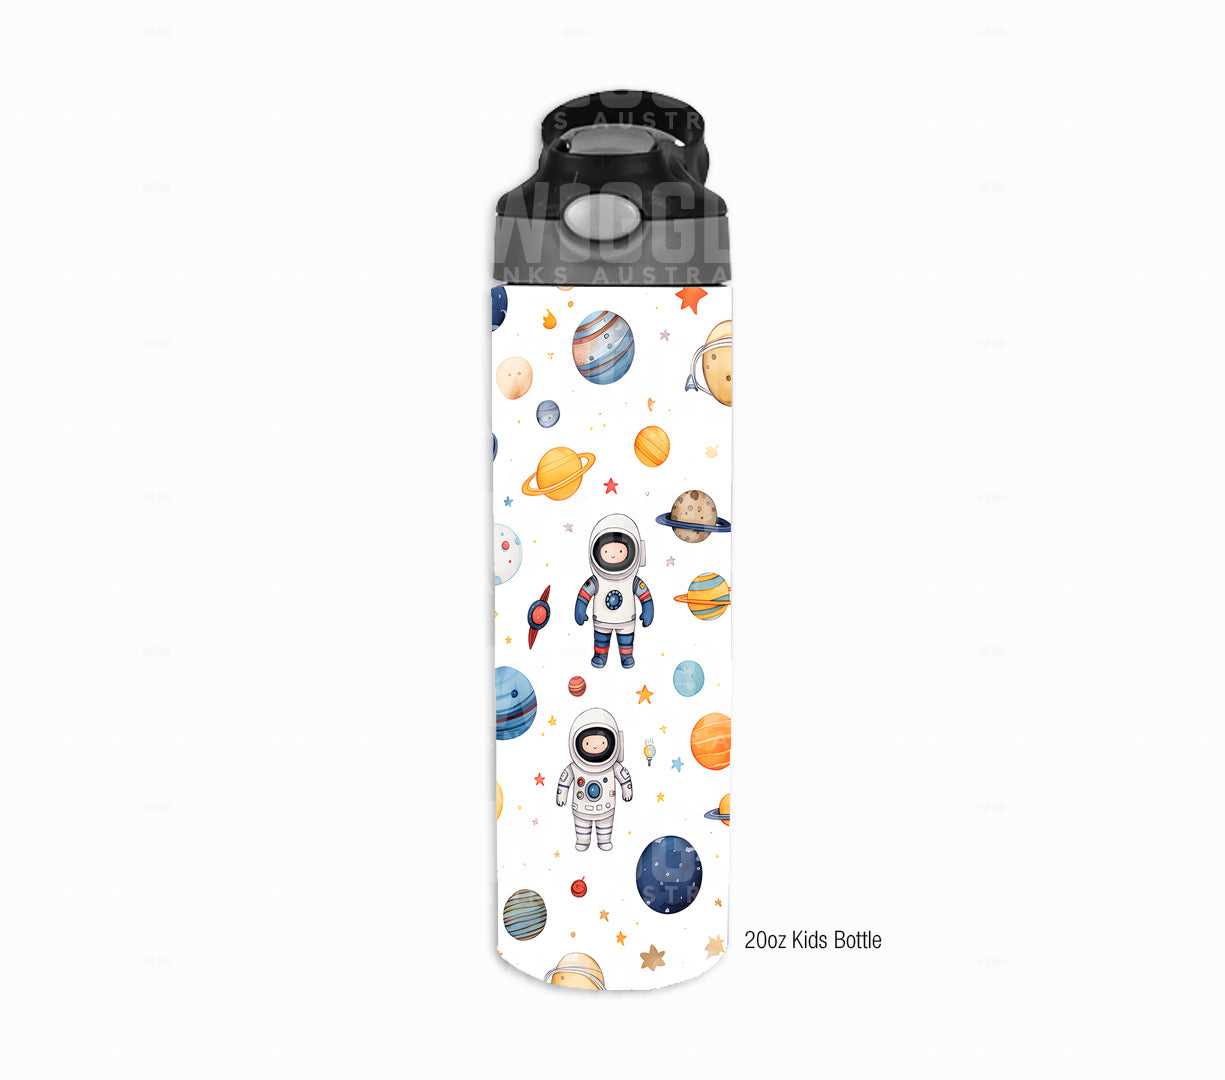 Astronauts in Space Watercolour Kids #131 - Digital Download - Assorted Bottle Sizes